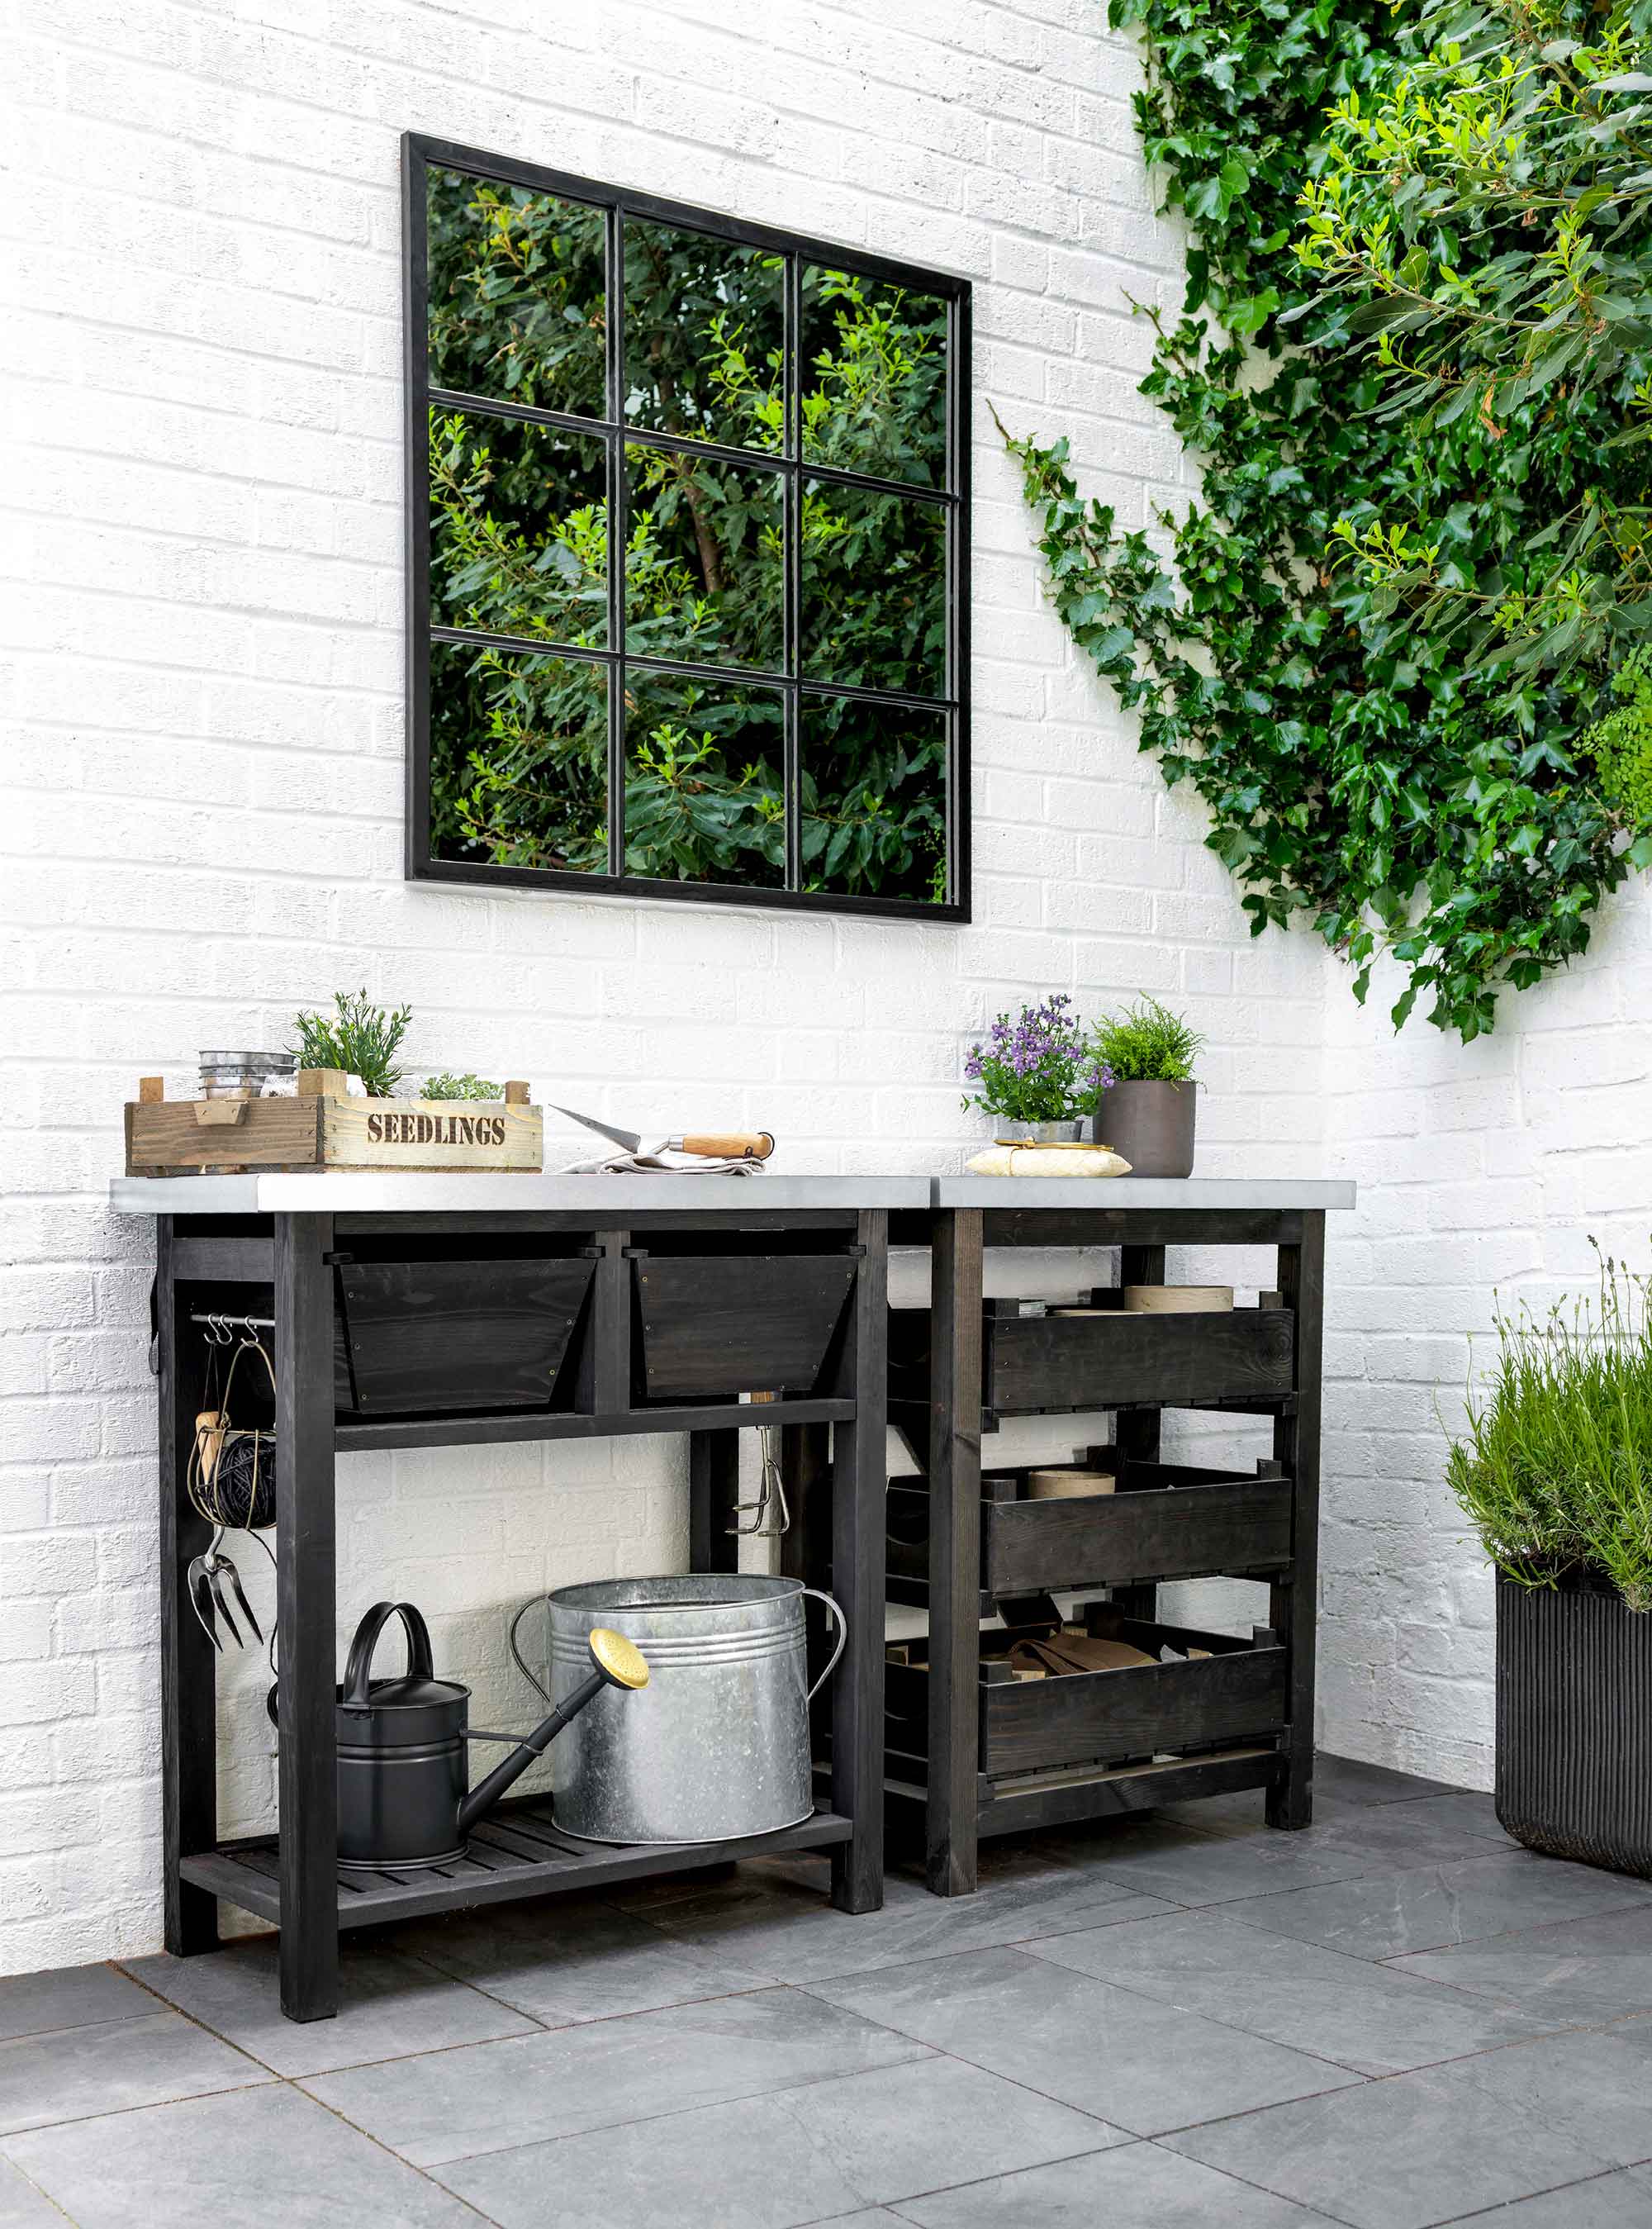 Garden storage ideas: 22 clever designs for organizing your backyard